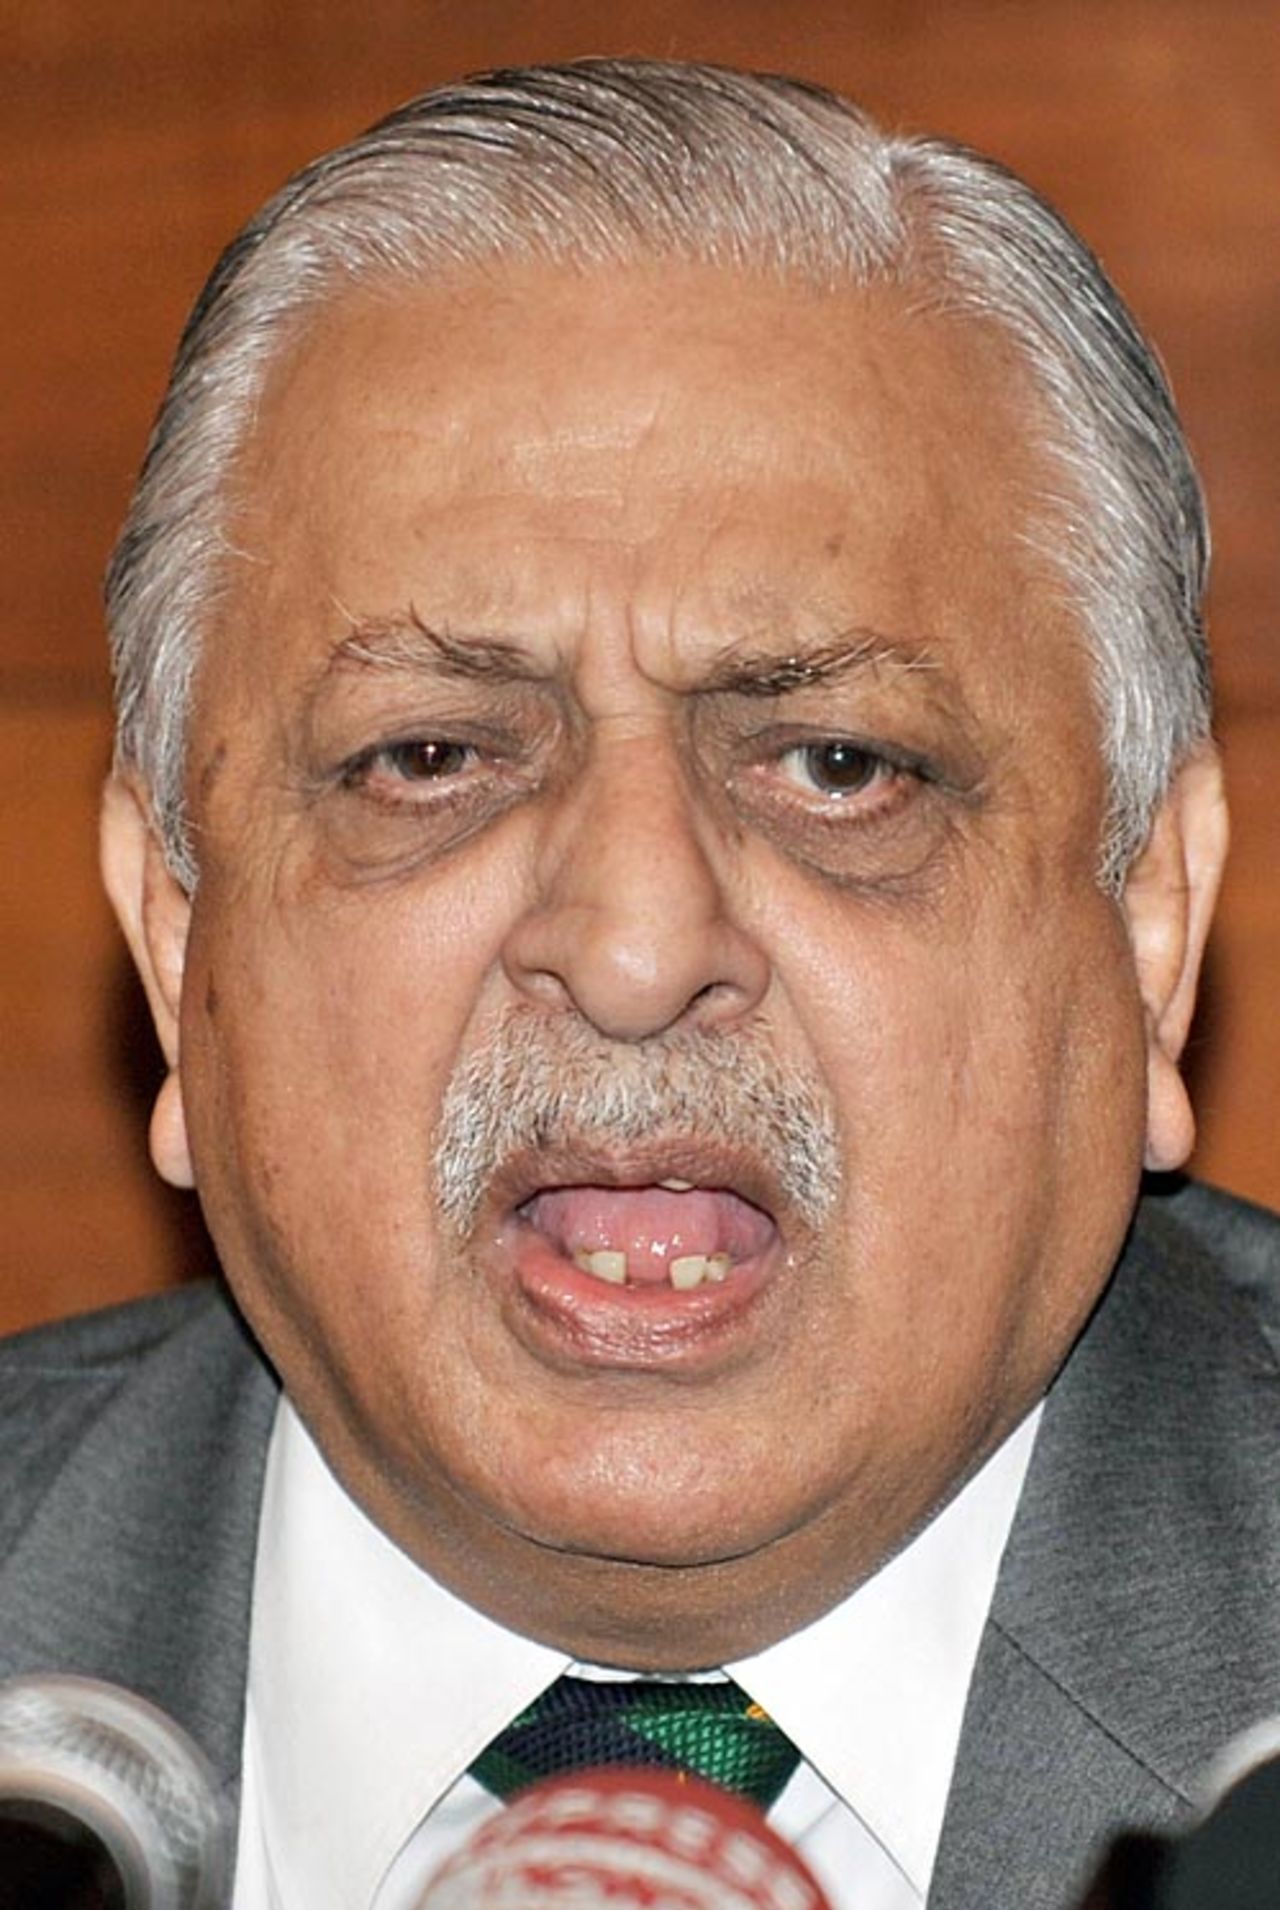 Ijaz Butt, the PCB chairman, answers a question during a press conference in Karachi, November 28, 2008